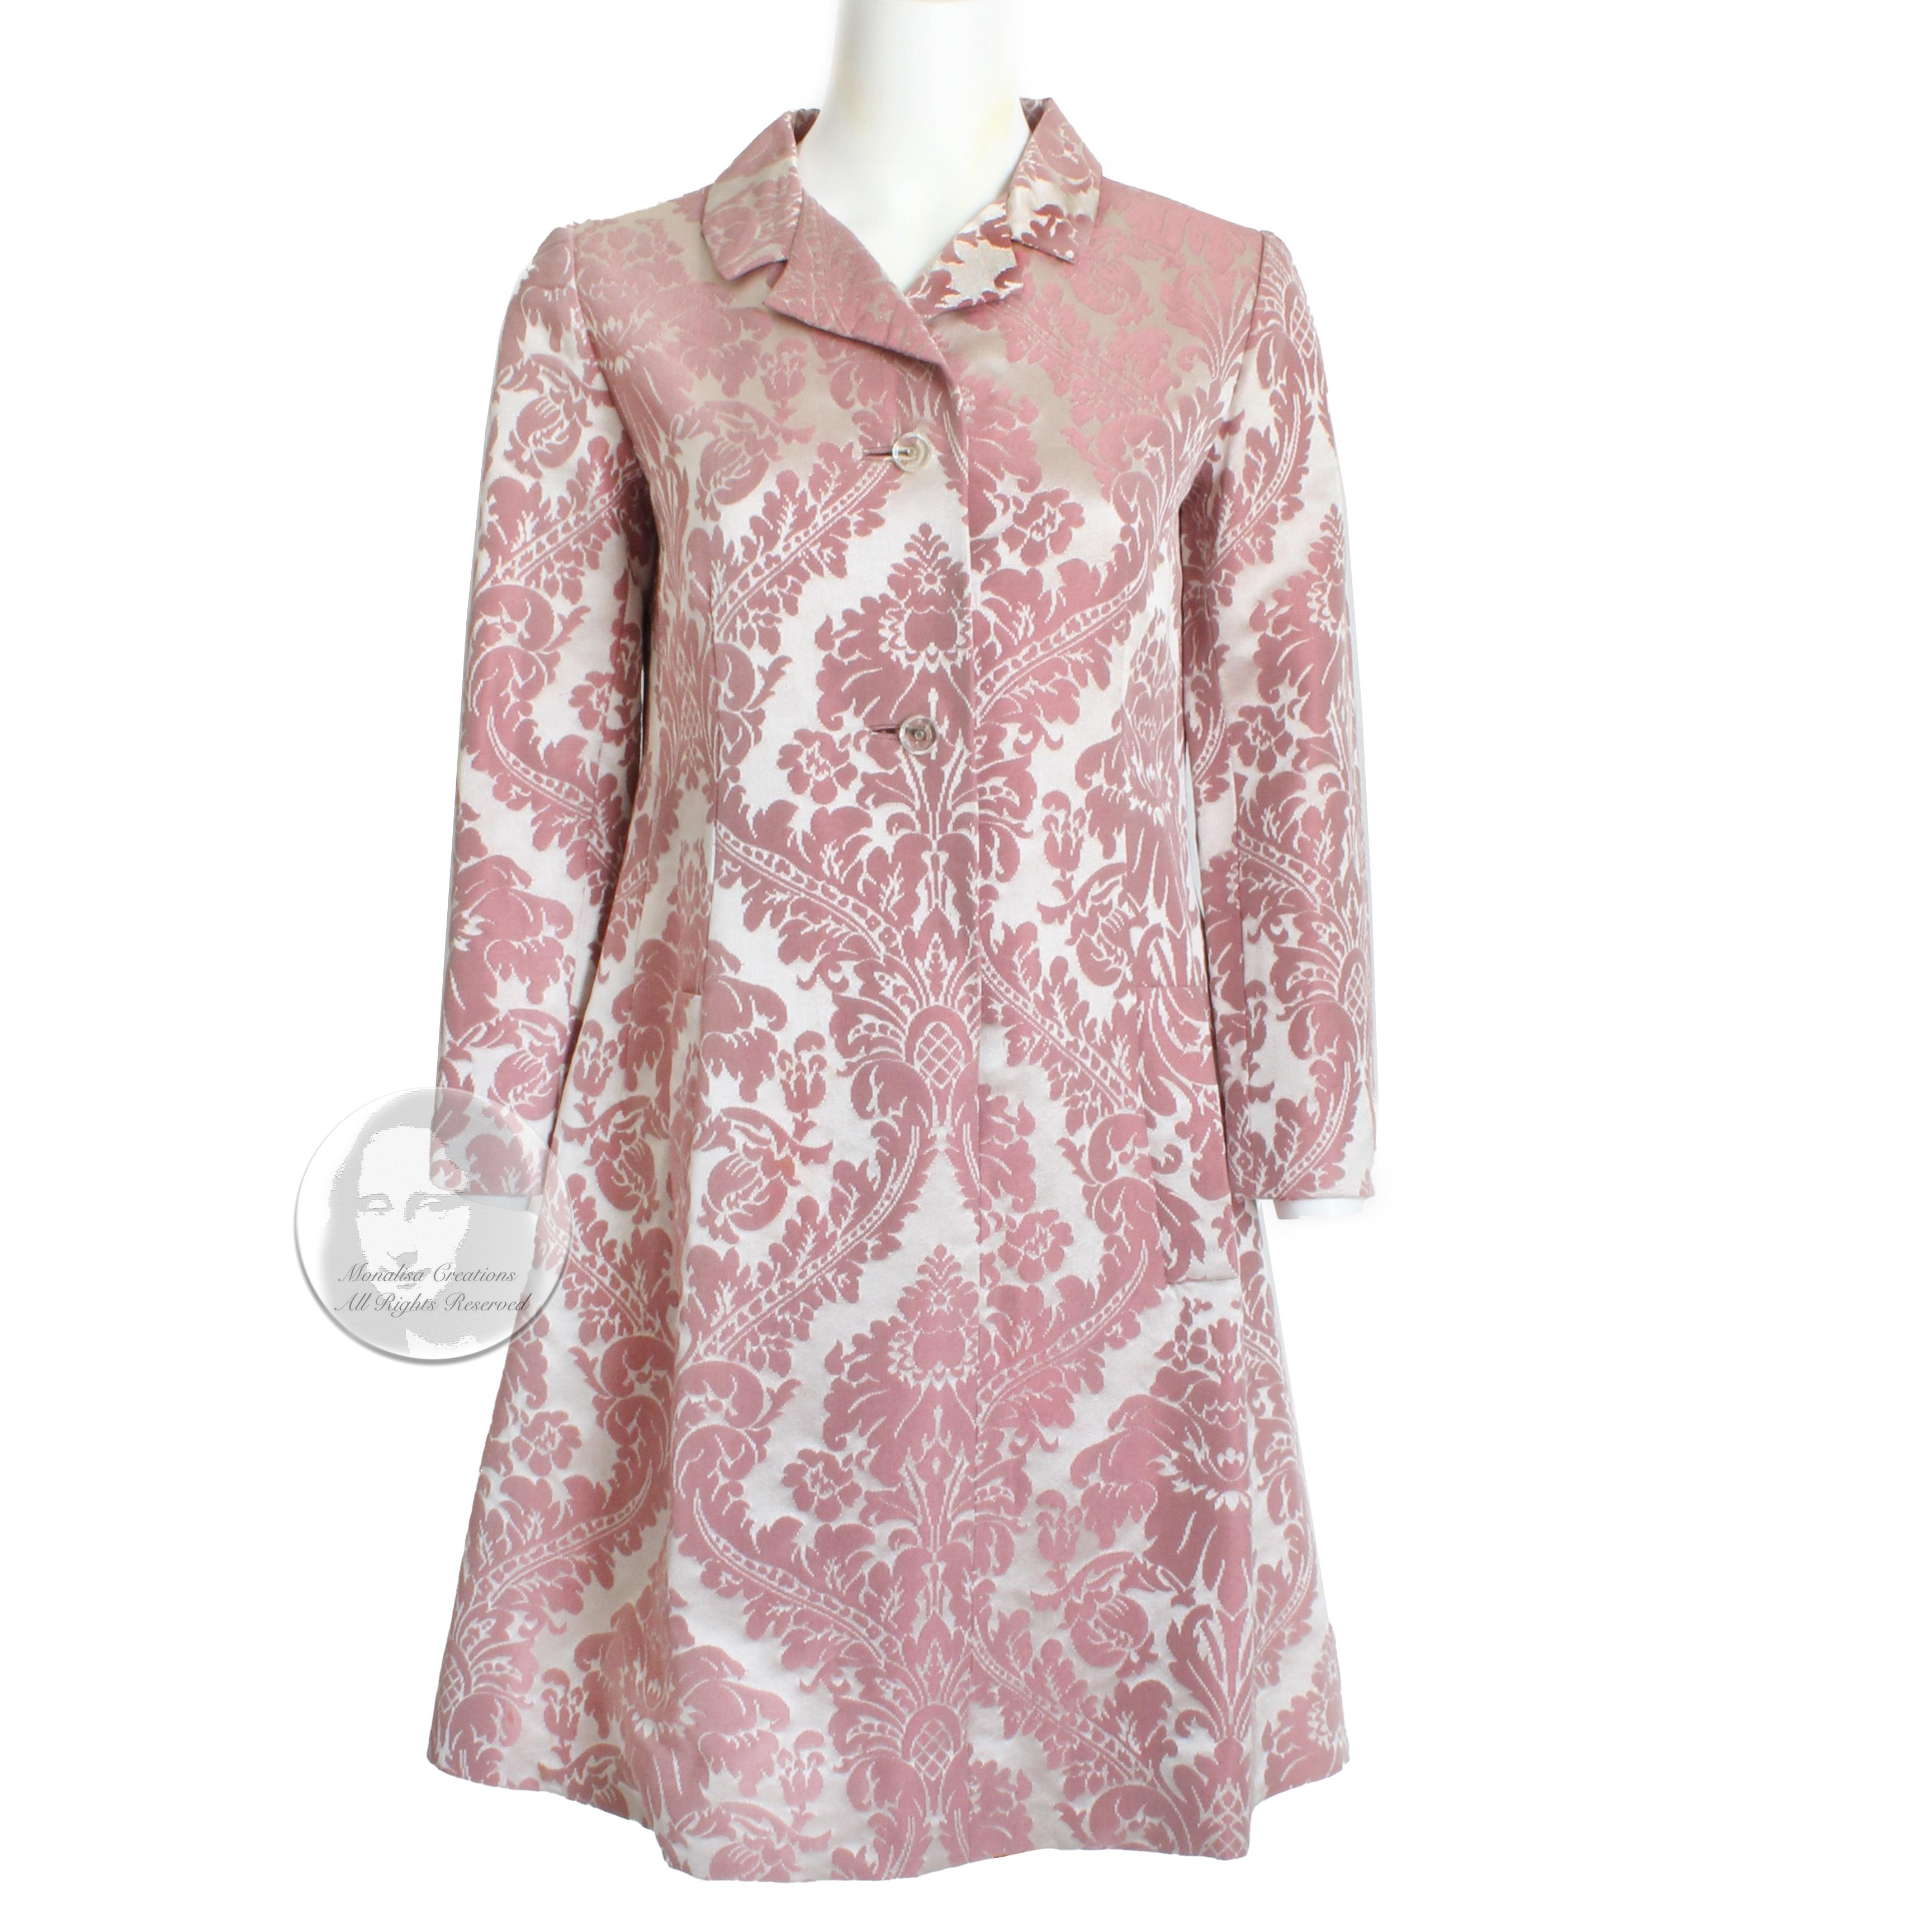 This fabulous coat dress was made by Chester Weinberg and sold by the Oval Room at Daytons, most likely in the mid 60s.   Made from a gorgeous pink floral damask, it has an incredible sheen to the fabric! It slips over the head and fastens with